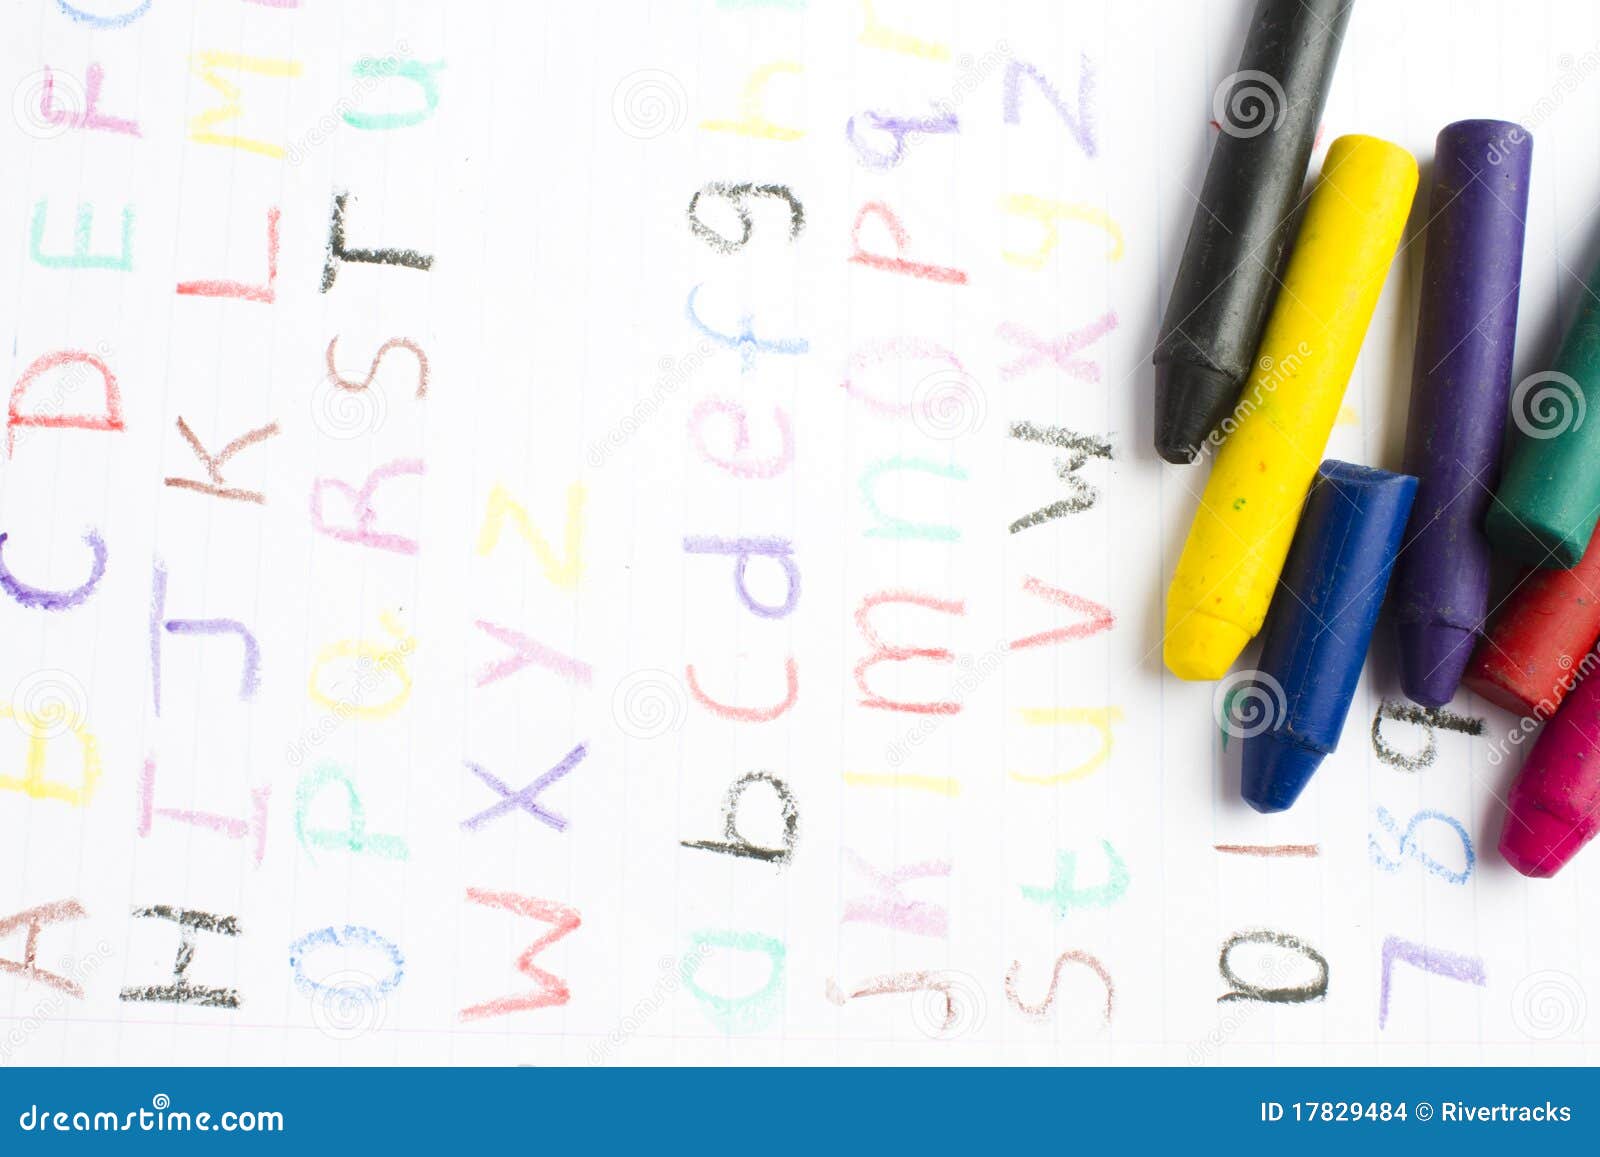 Childrens Writing With Wax Crayons Stock Photo - Image of school, crayola: 17829484